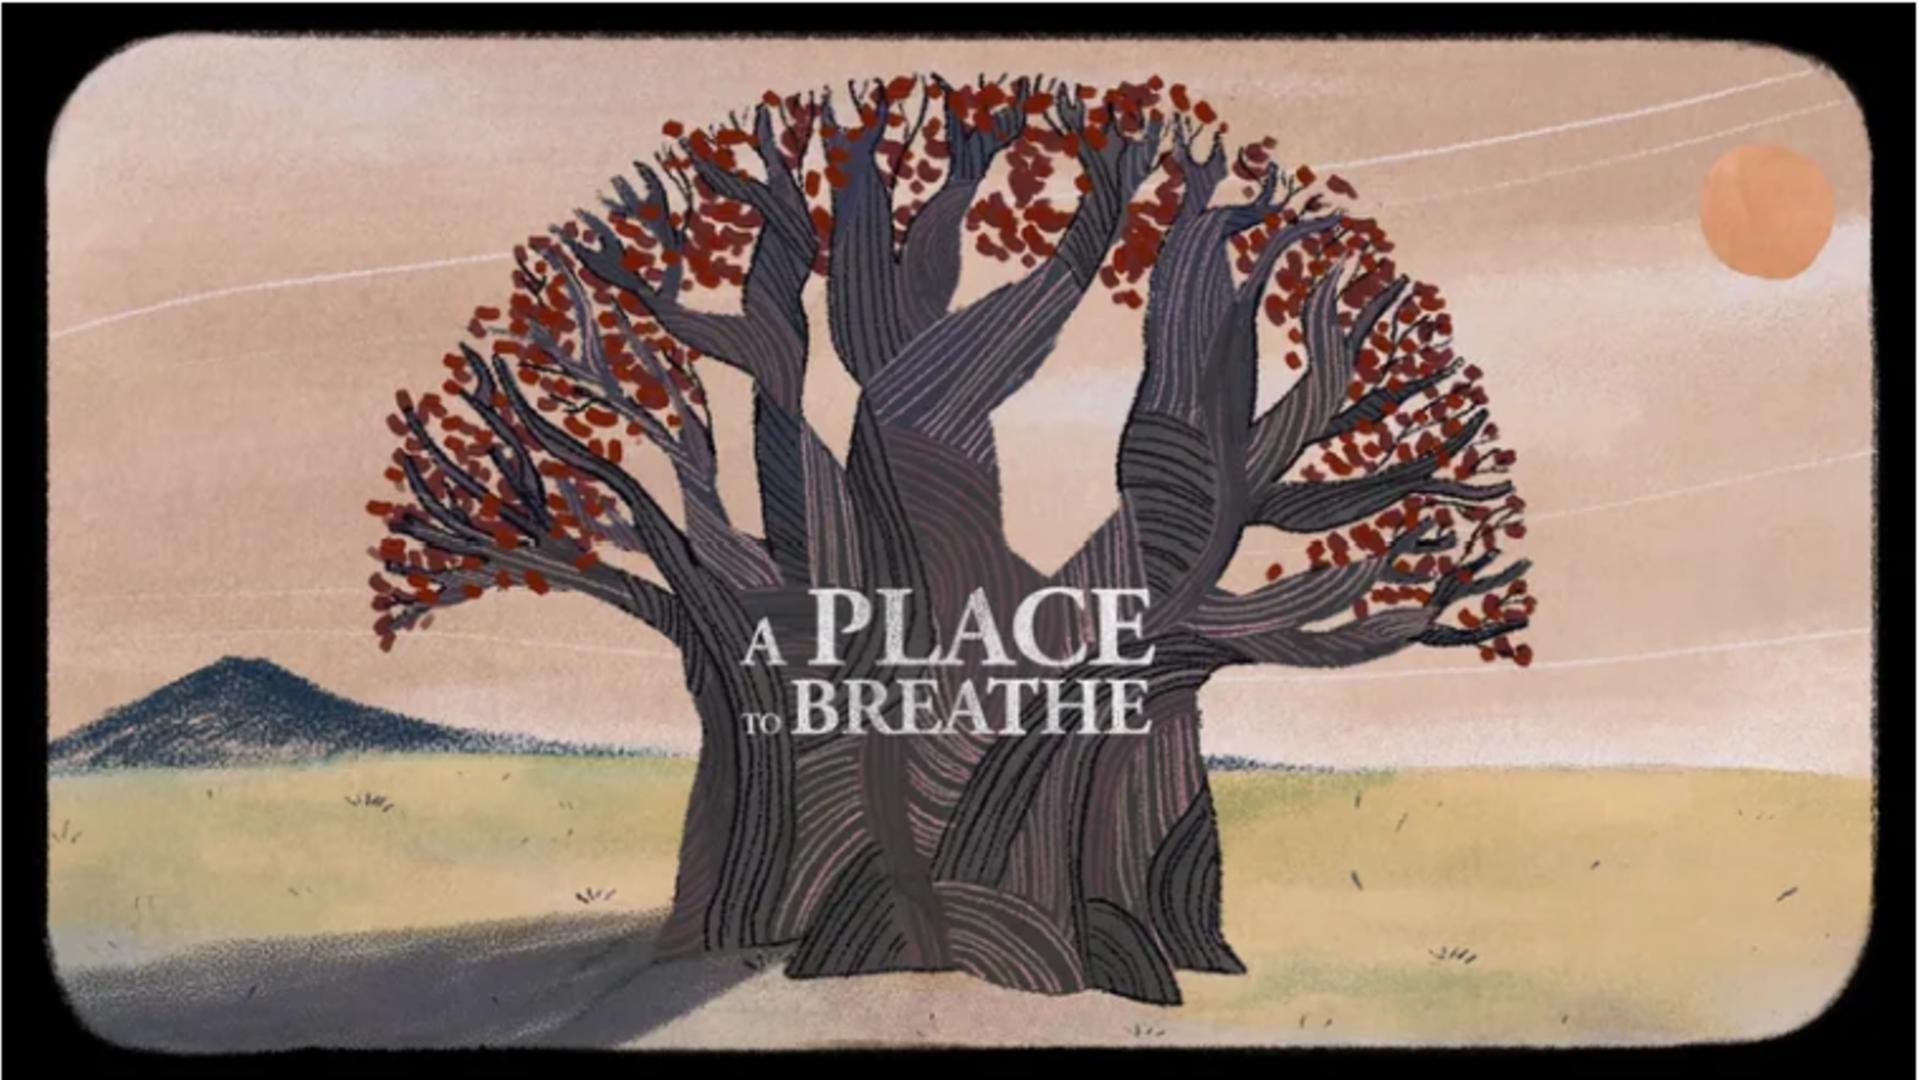 A Place to Breathe + Panel (9:00am - 11:50am)